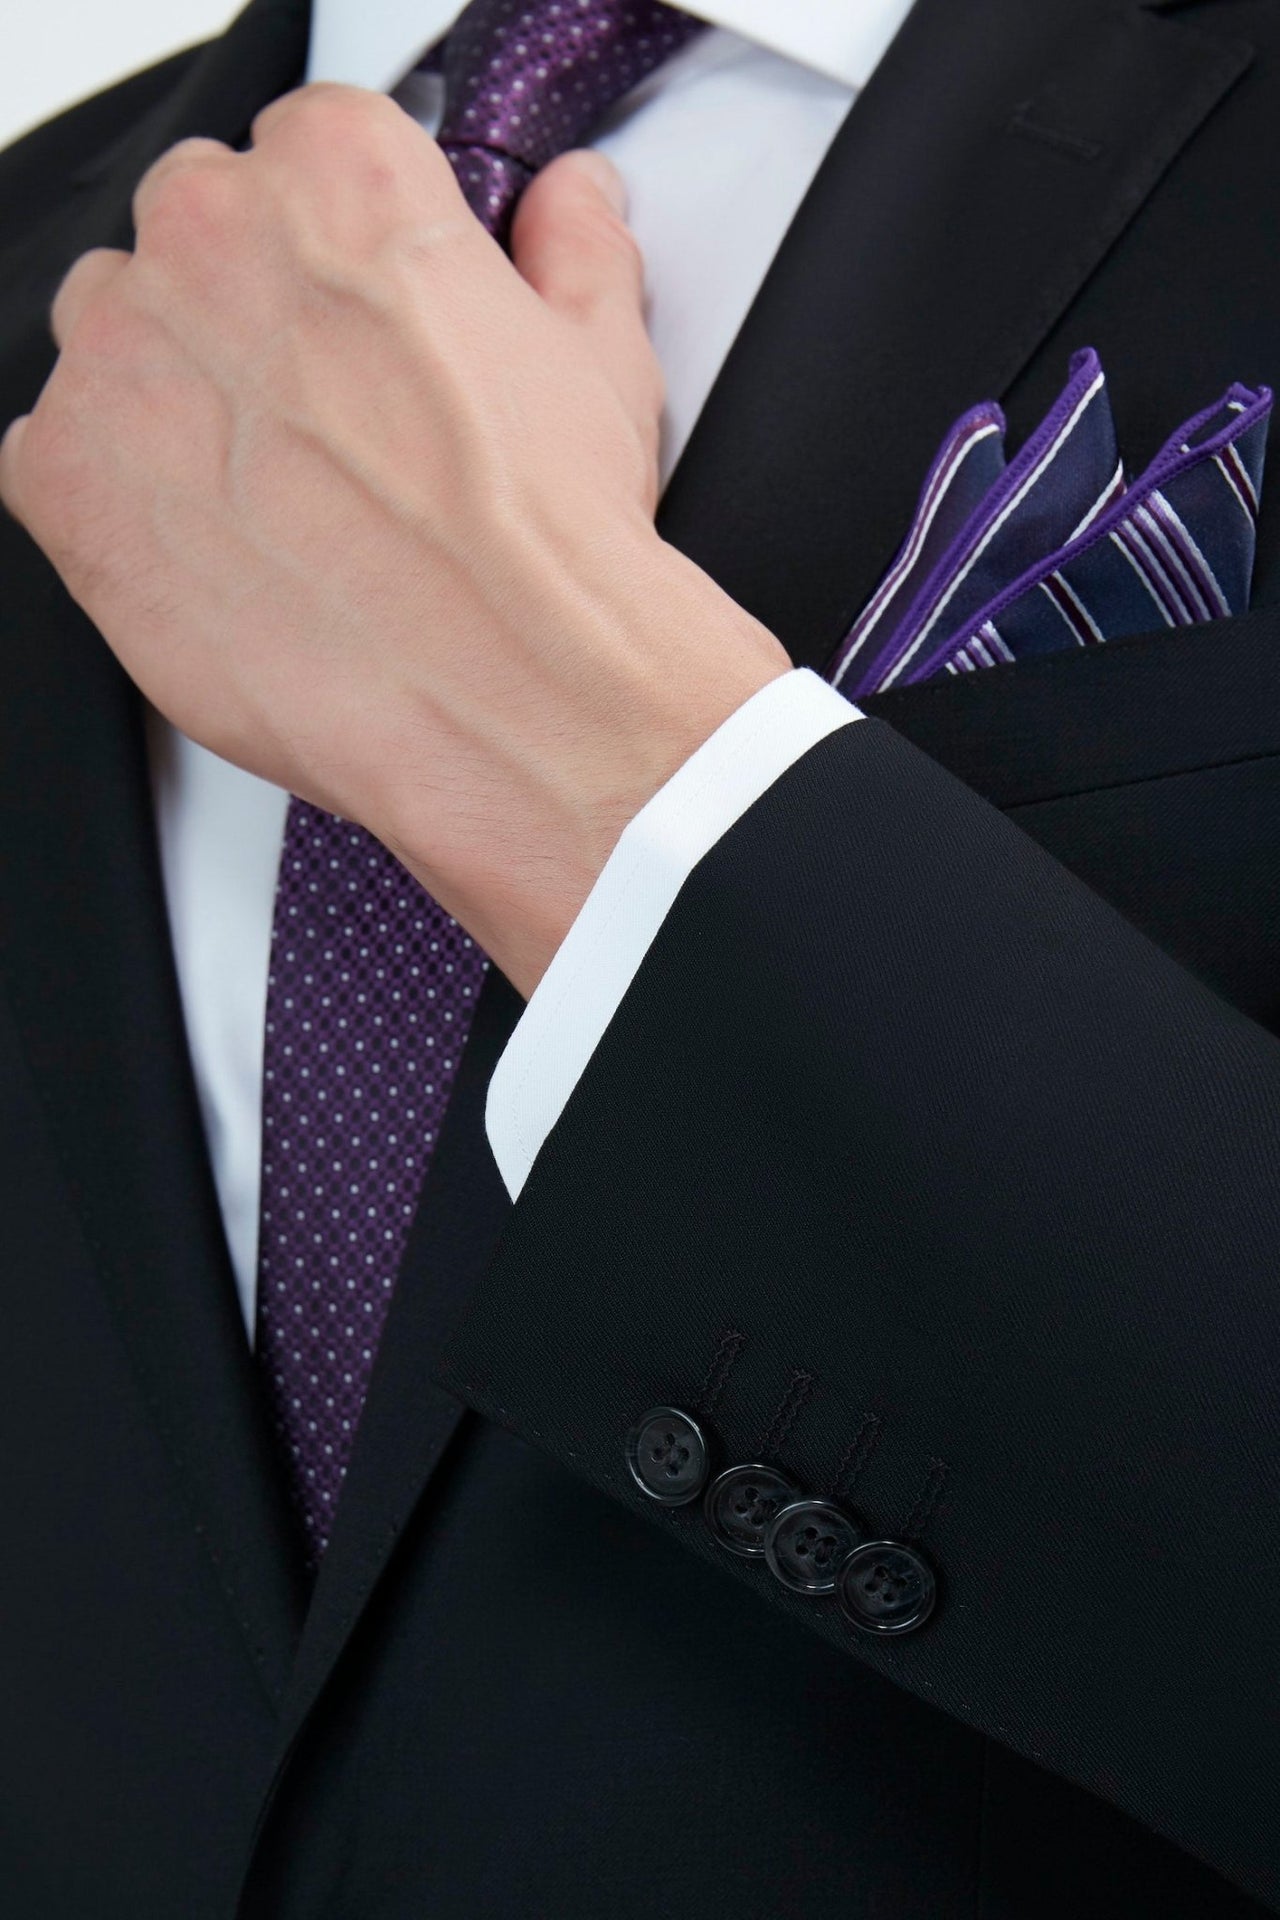 What color of shirt and tie should one wear with a black suit? - Quora